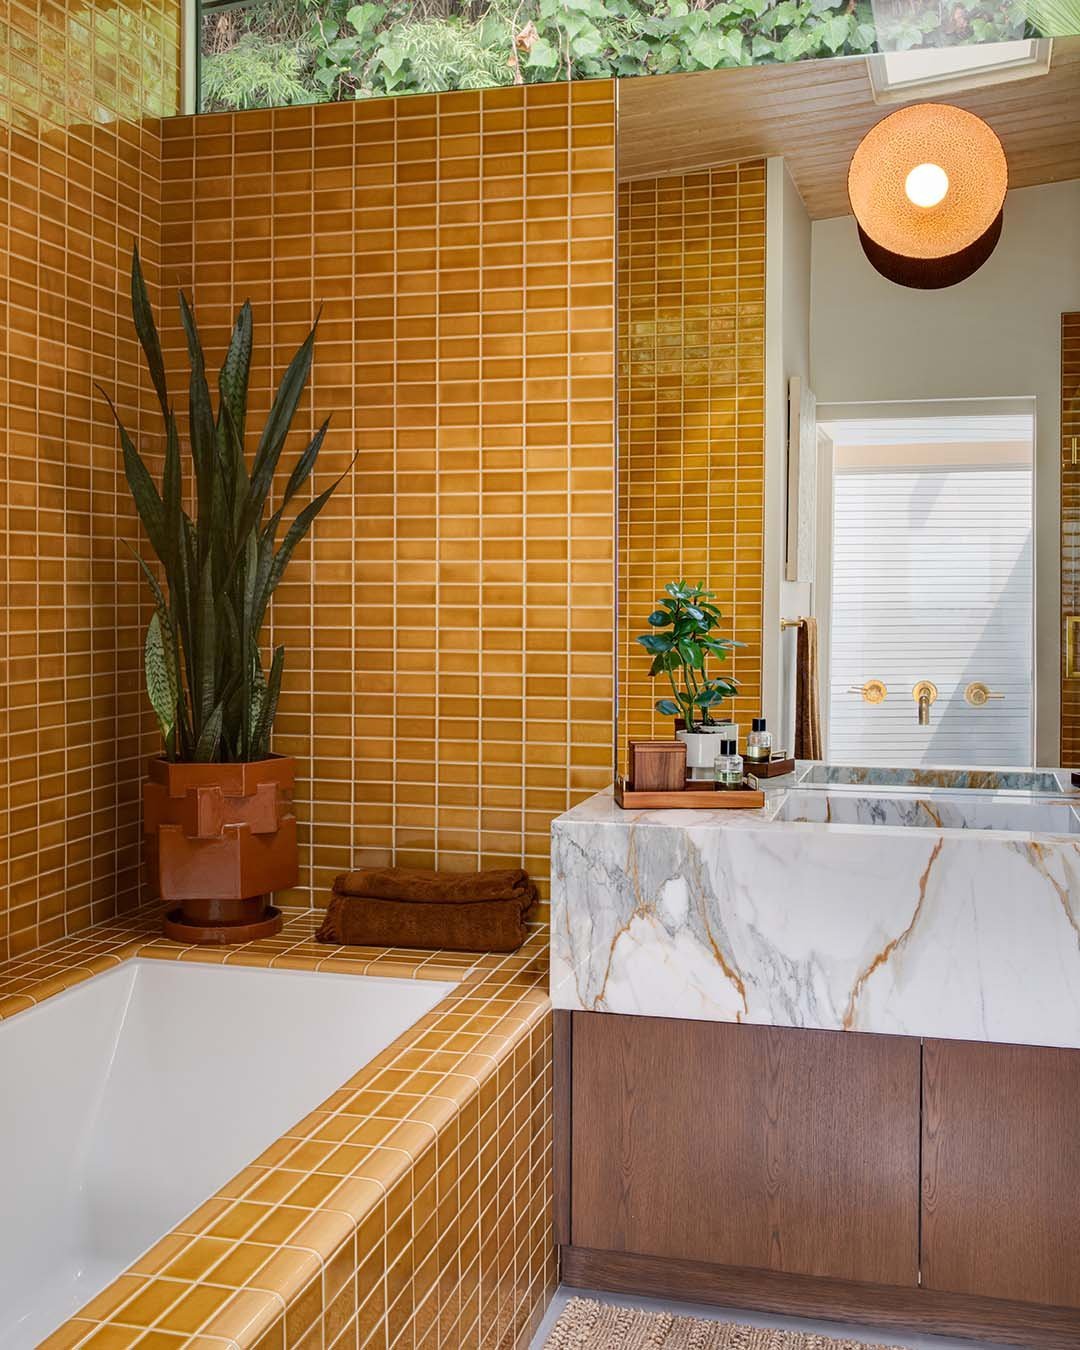 Rich Yellow Tiles With Golden Touch